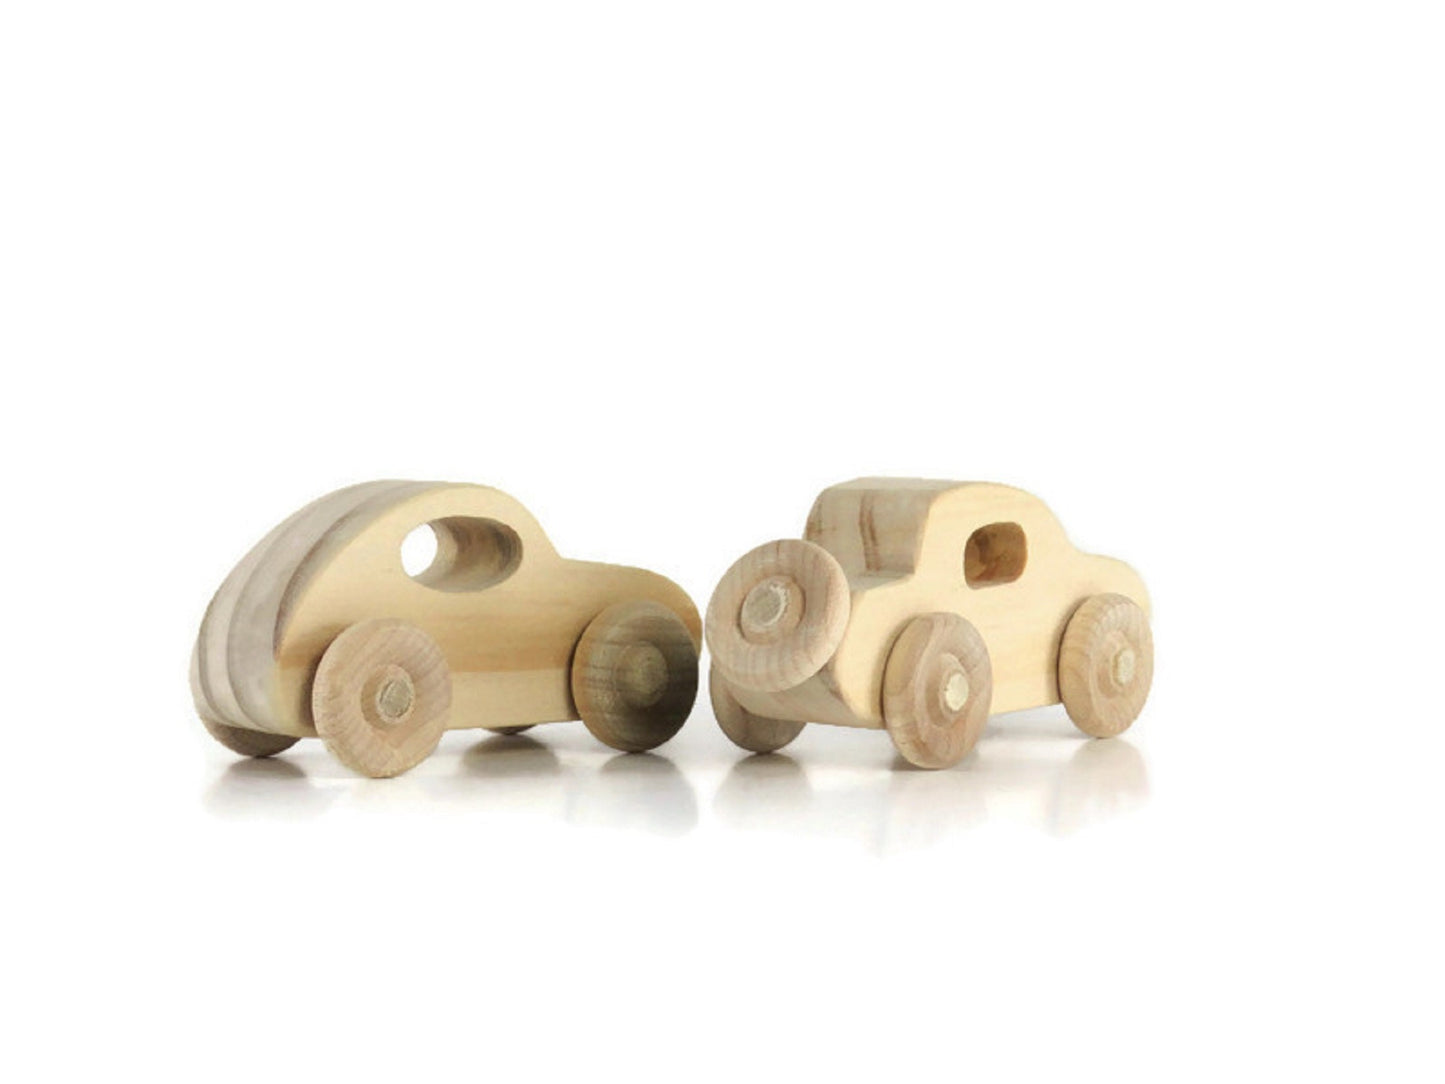 Two small wooden toy cars